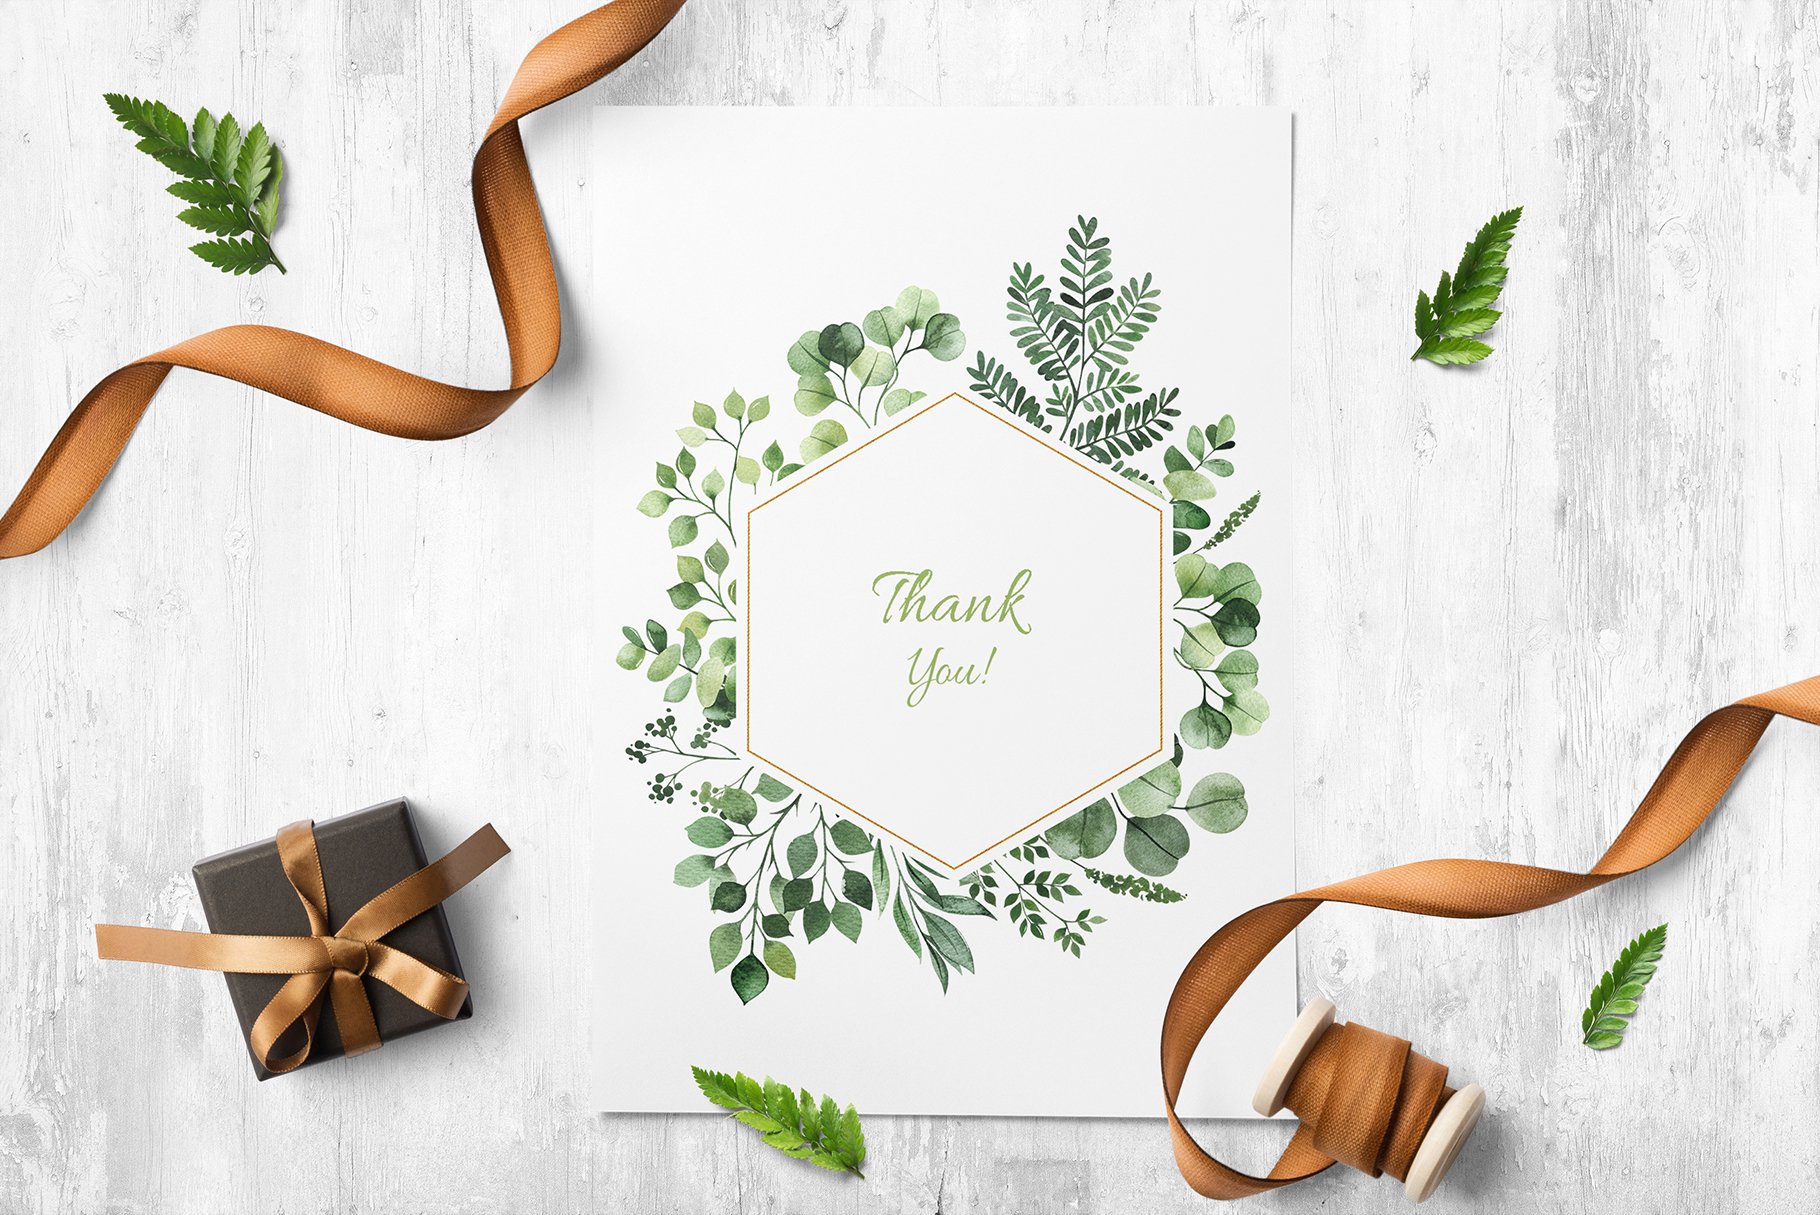 Thank card with greenery and ribbon.